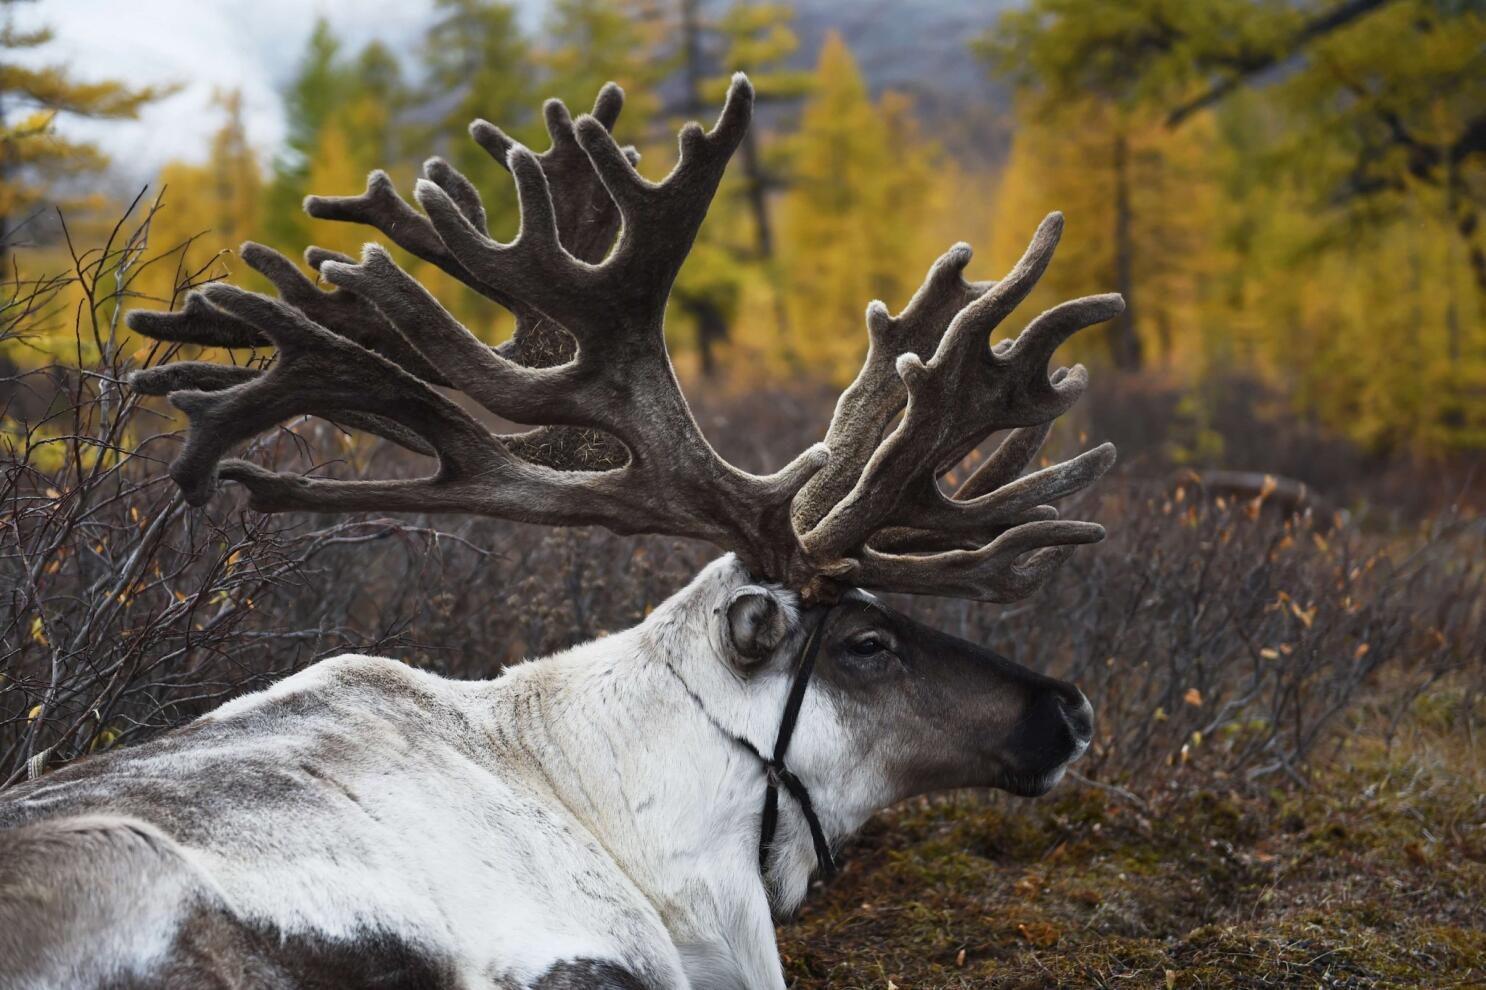 The Meaning of Santa's Reindeer Names